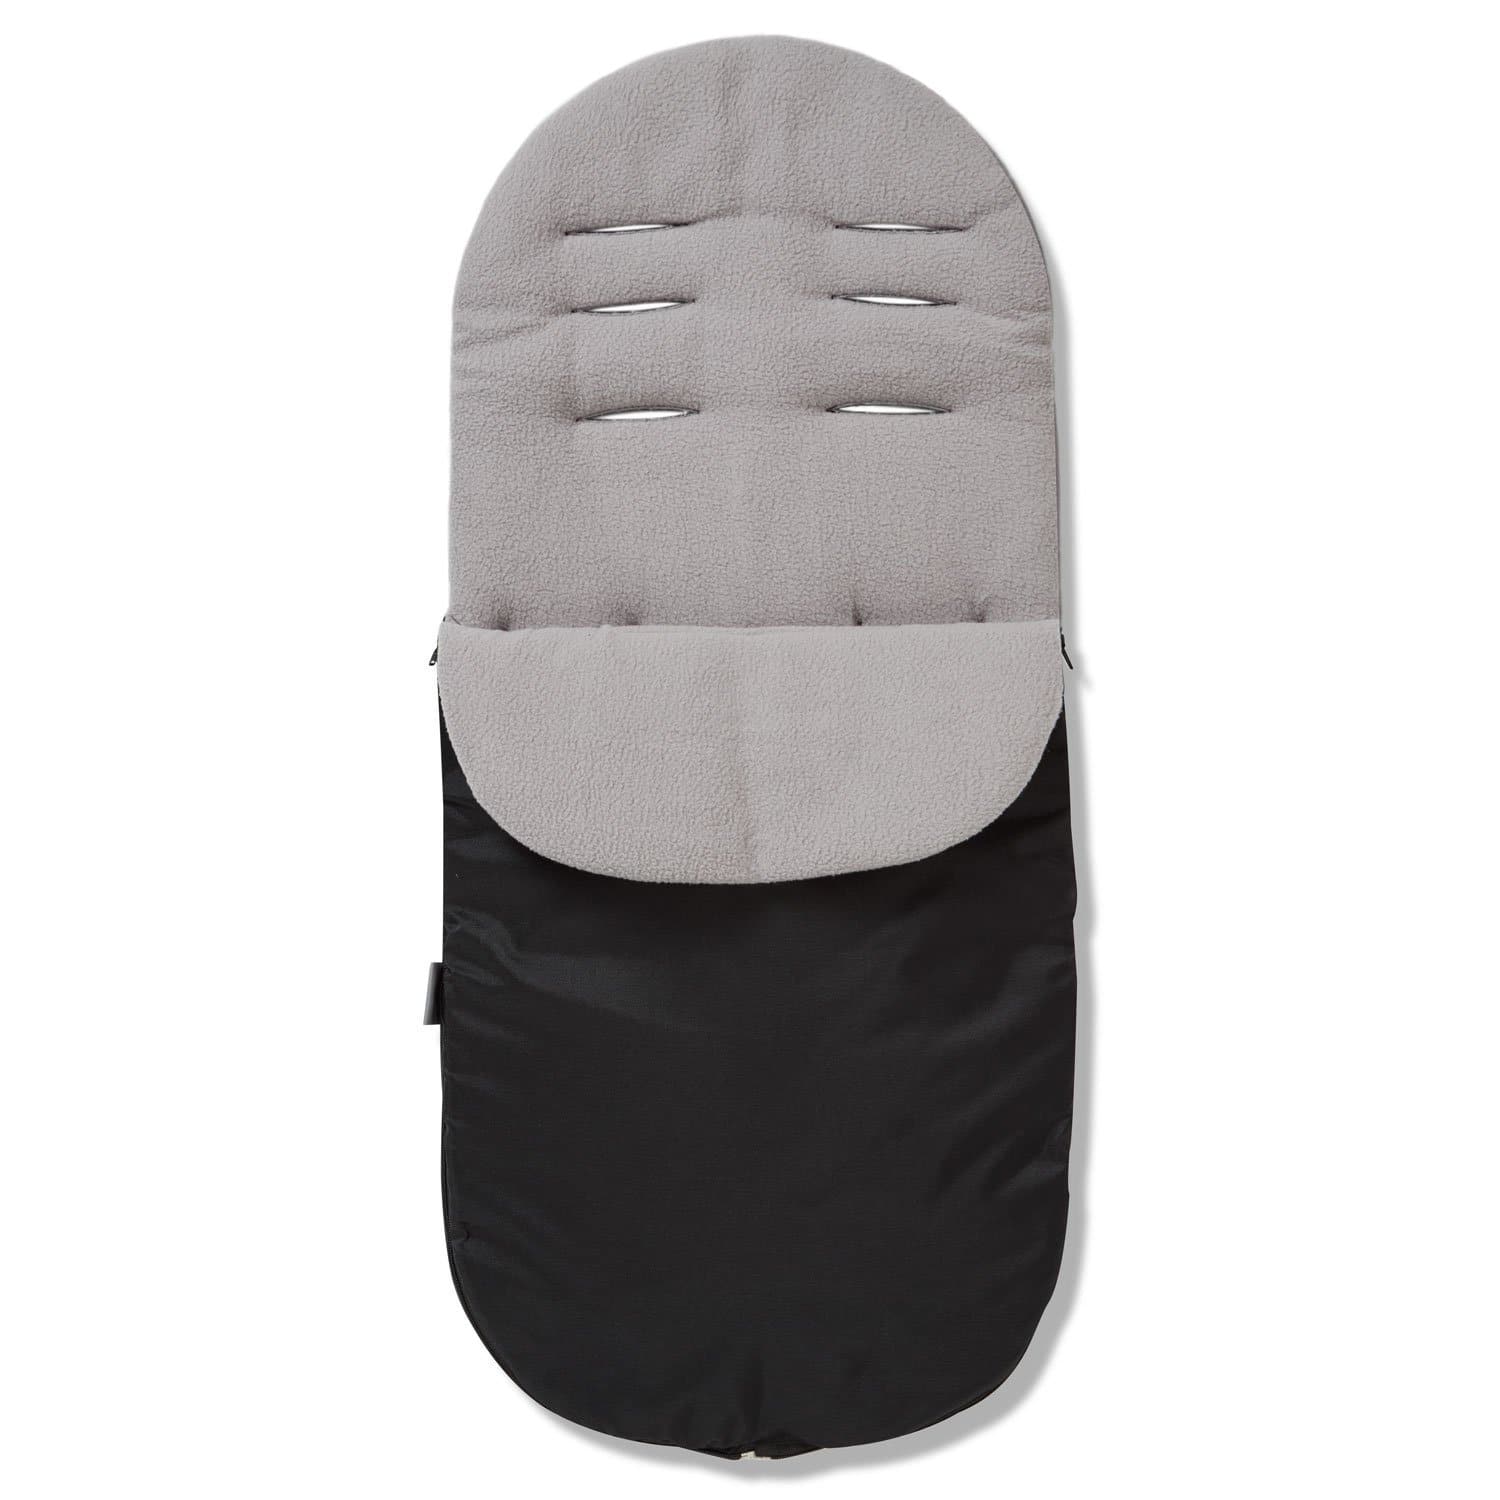 Footmuff / Cosy Toes Compatible with Mothercare - Grey / Fits All Models | For Your Little One